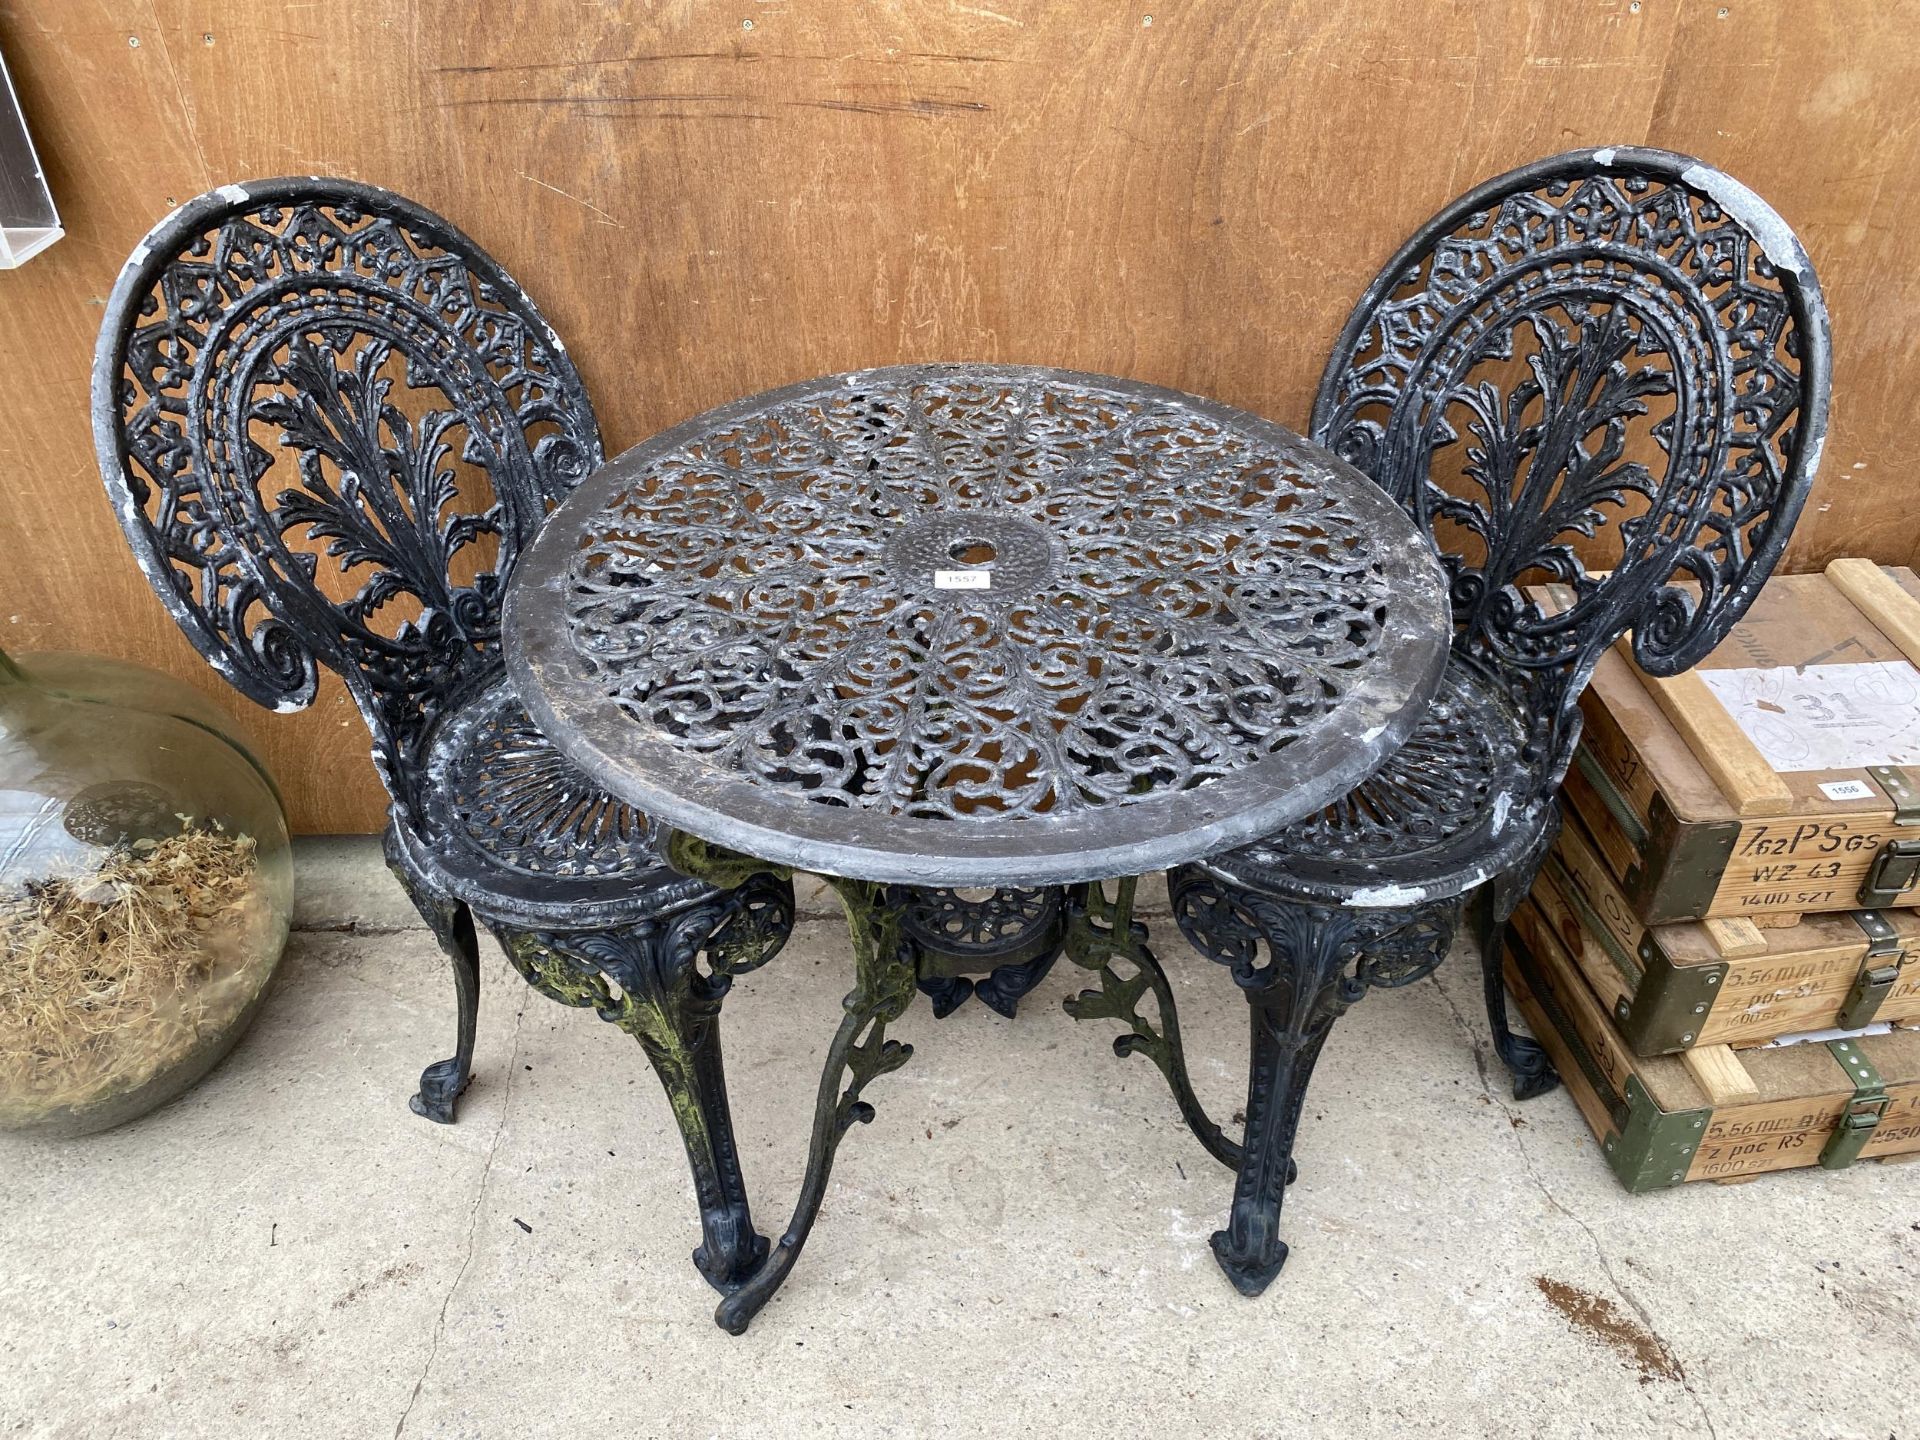 A VINTAGE CAST ALLOY BISTRO SET COMPRISING OF A ROUND TABLE AND TWO CHAIRS